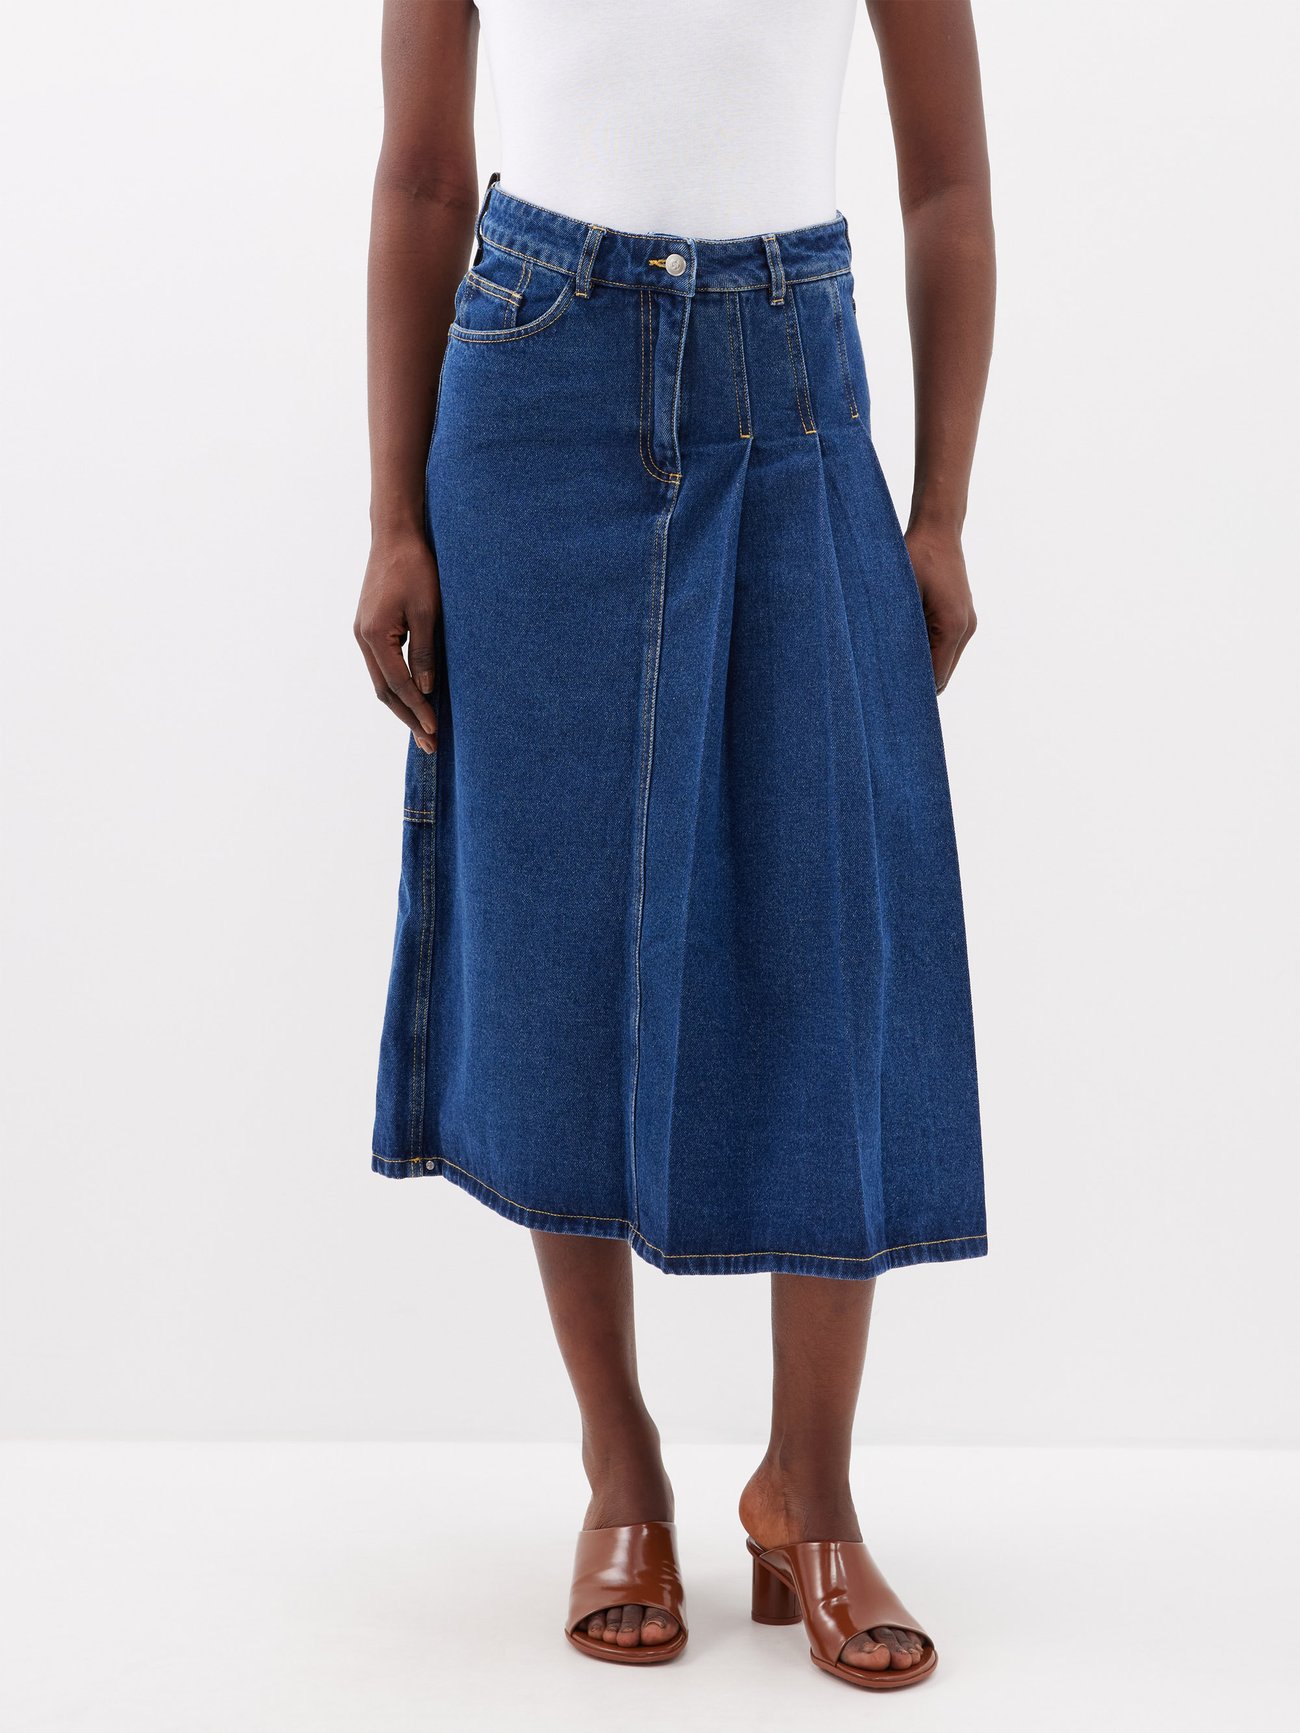 35 Best Long Denim Skirts to Buy in 2023 for Every Budget